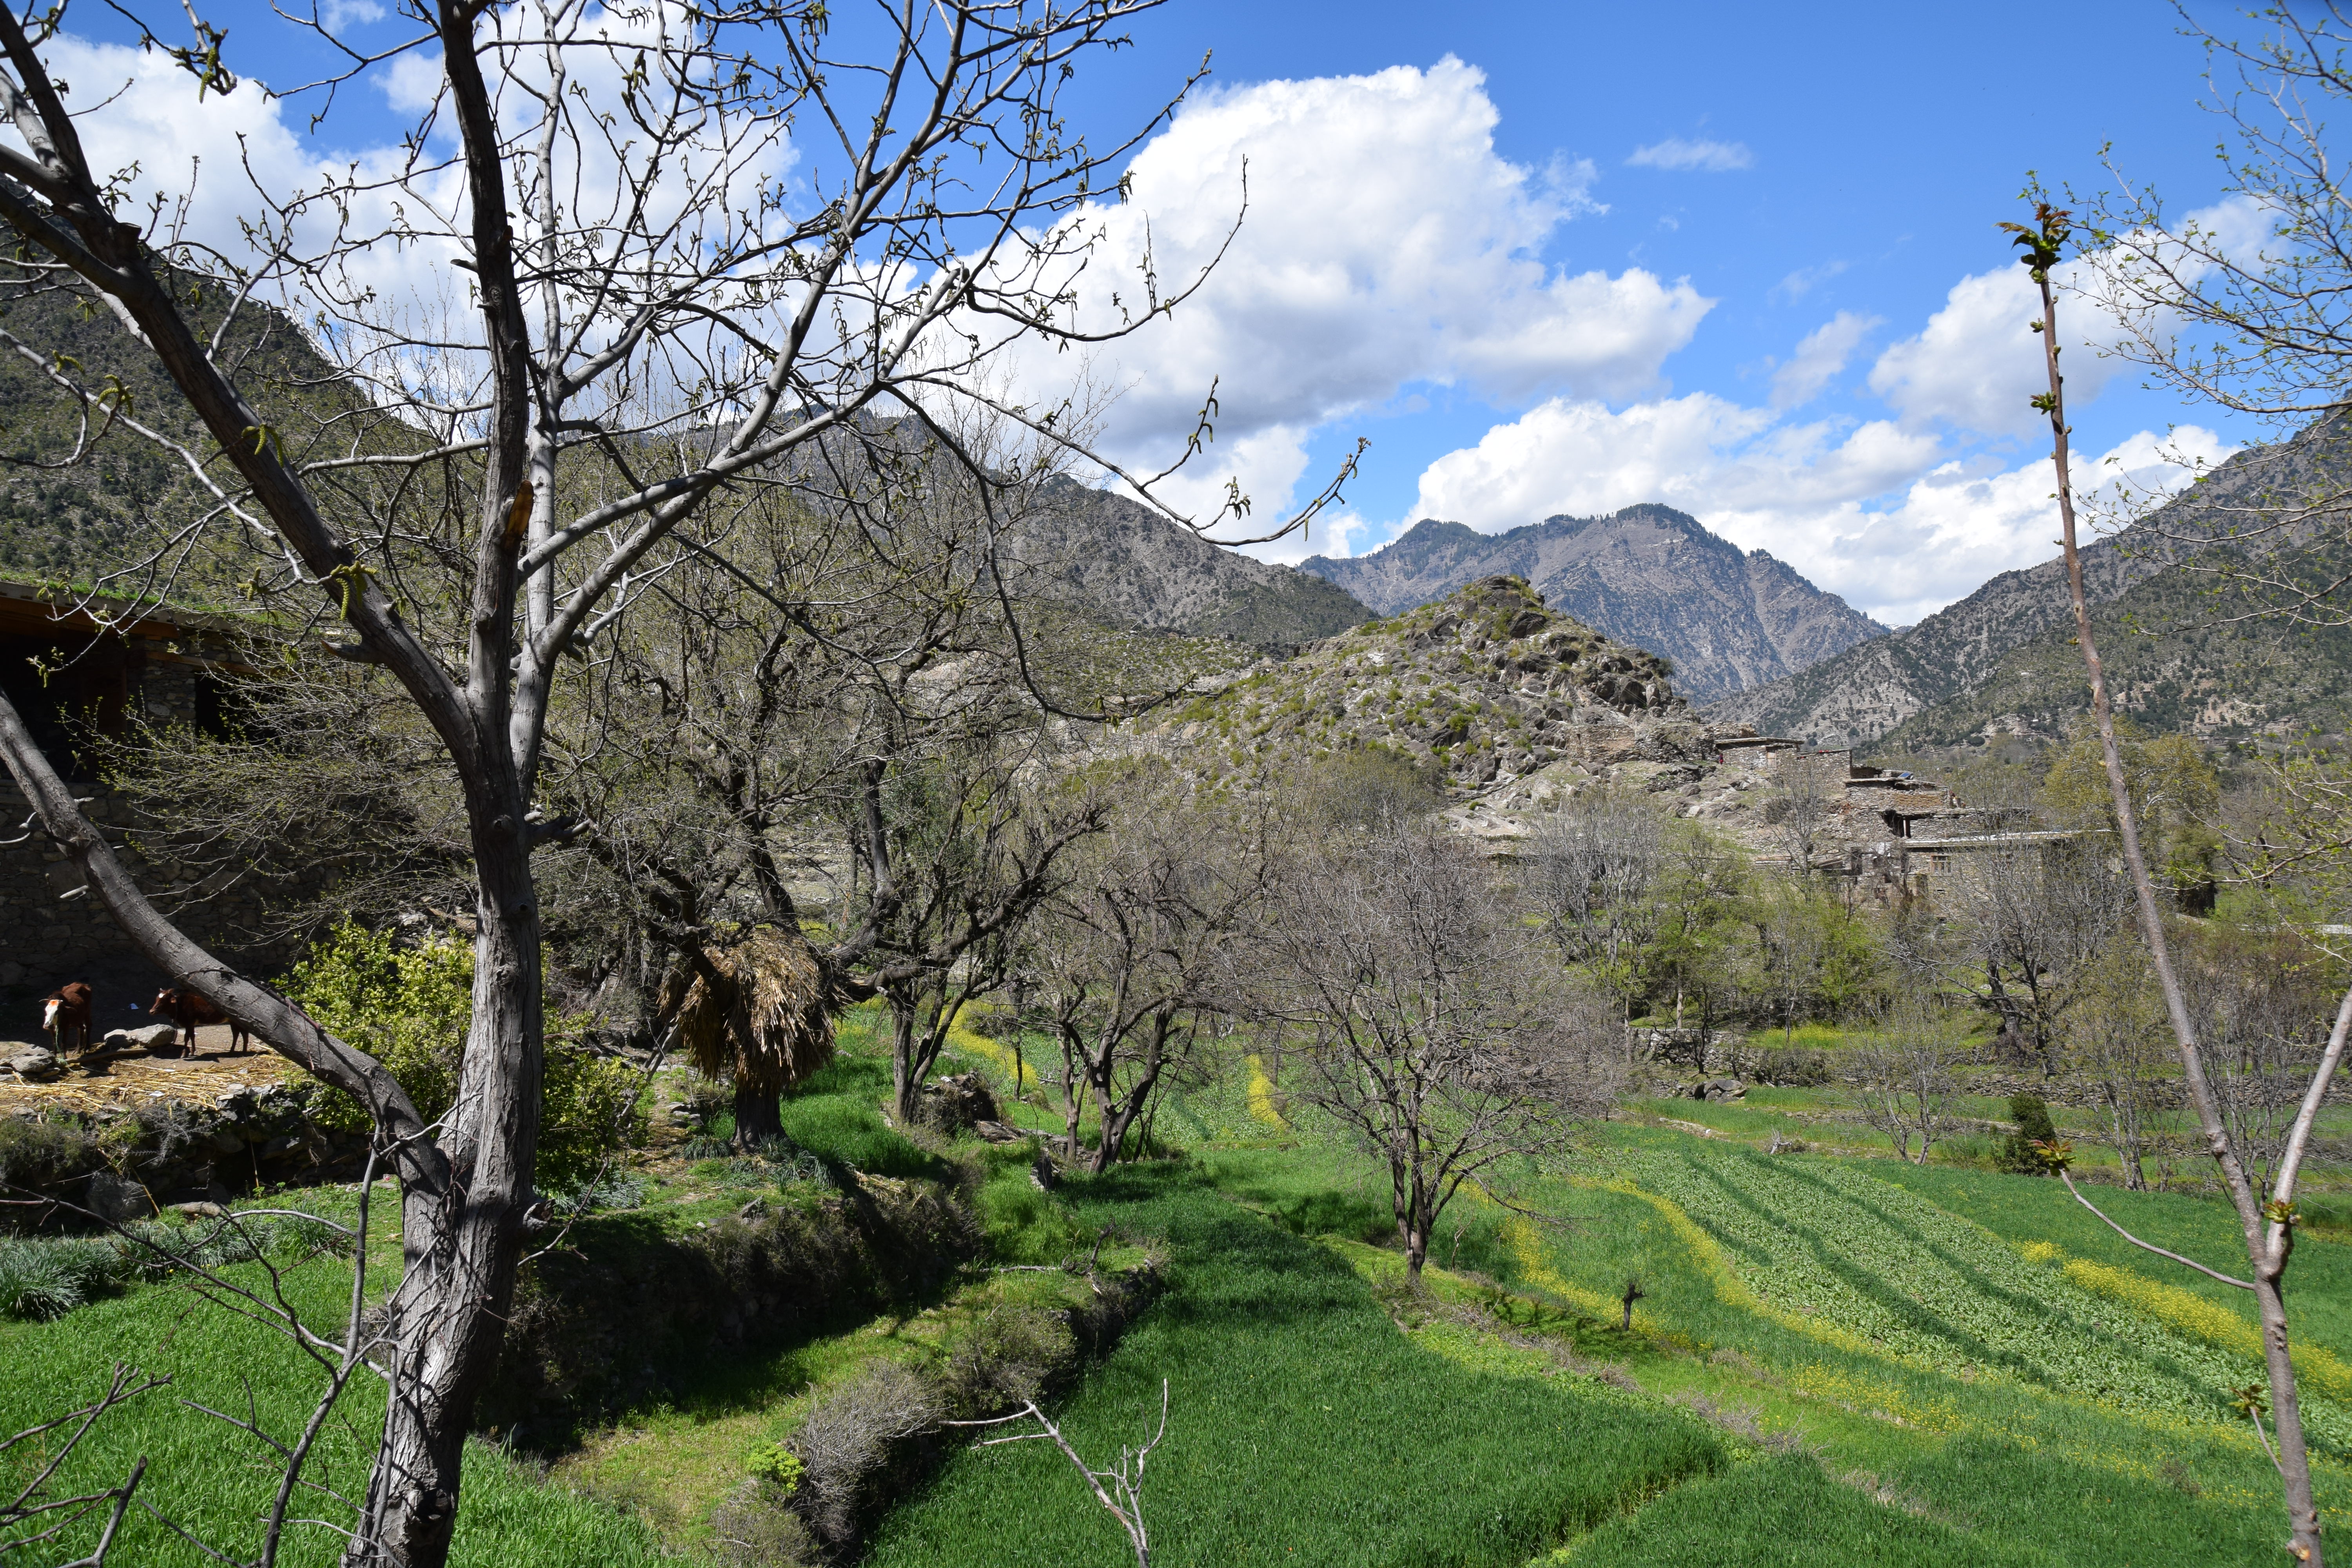 Village of Laché, Shigal Valley, Kunar, Afghanistan